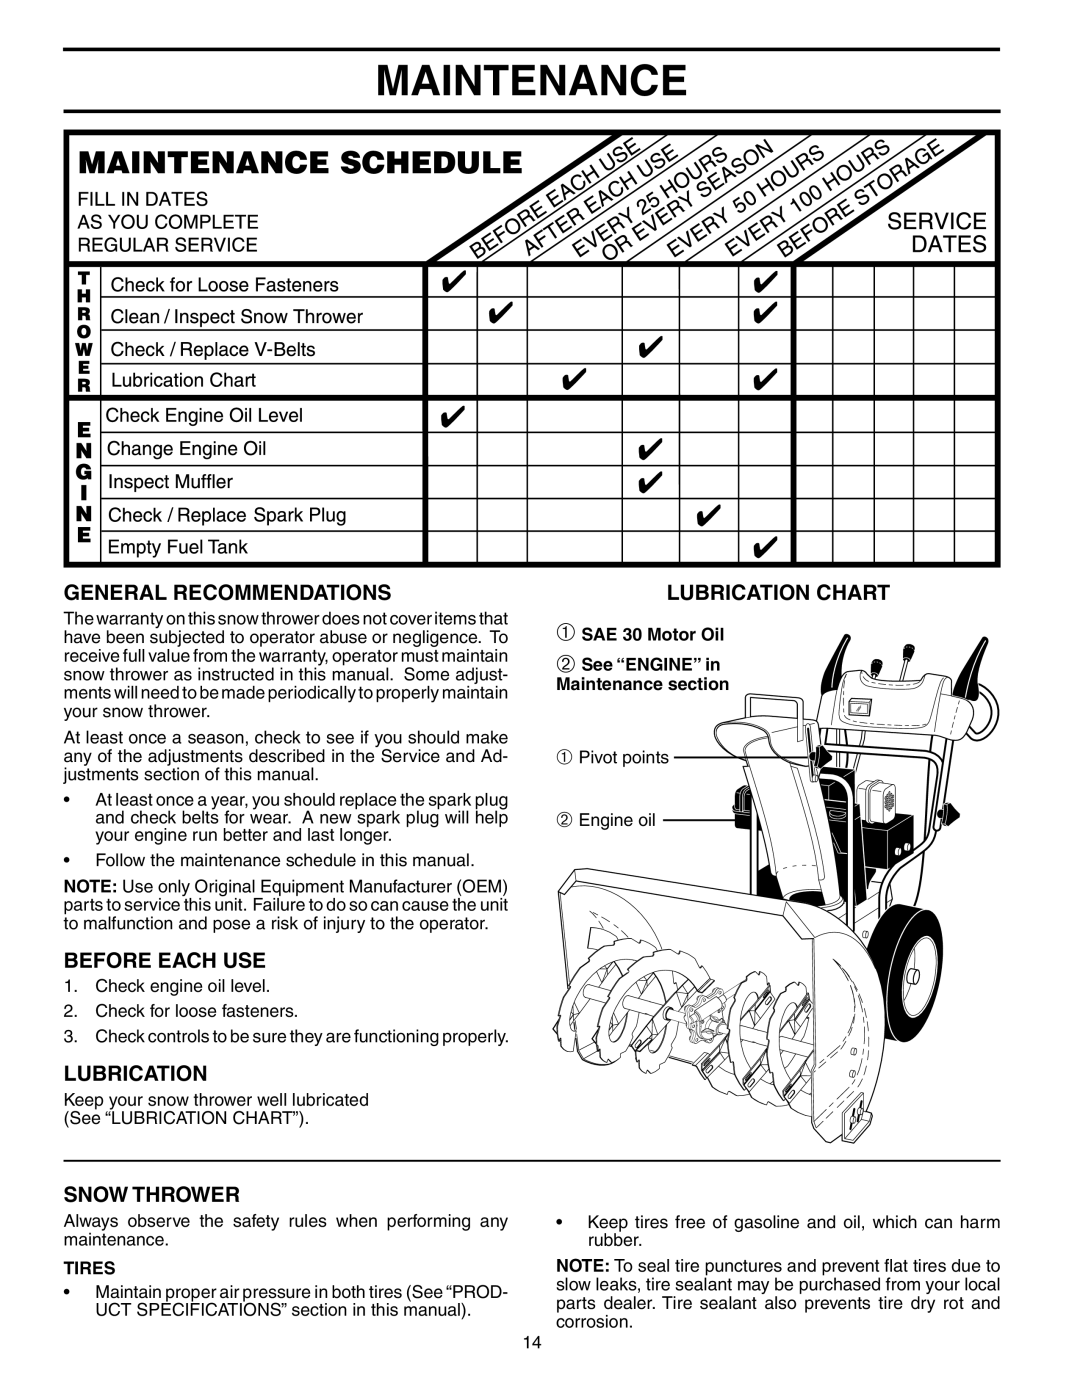 Husqvarna 1027STE Maintenance, General Recommendations, Before Each Use, Snow Thrower, Lubrication Chart, Tires 